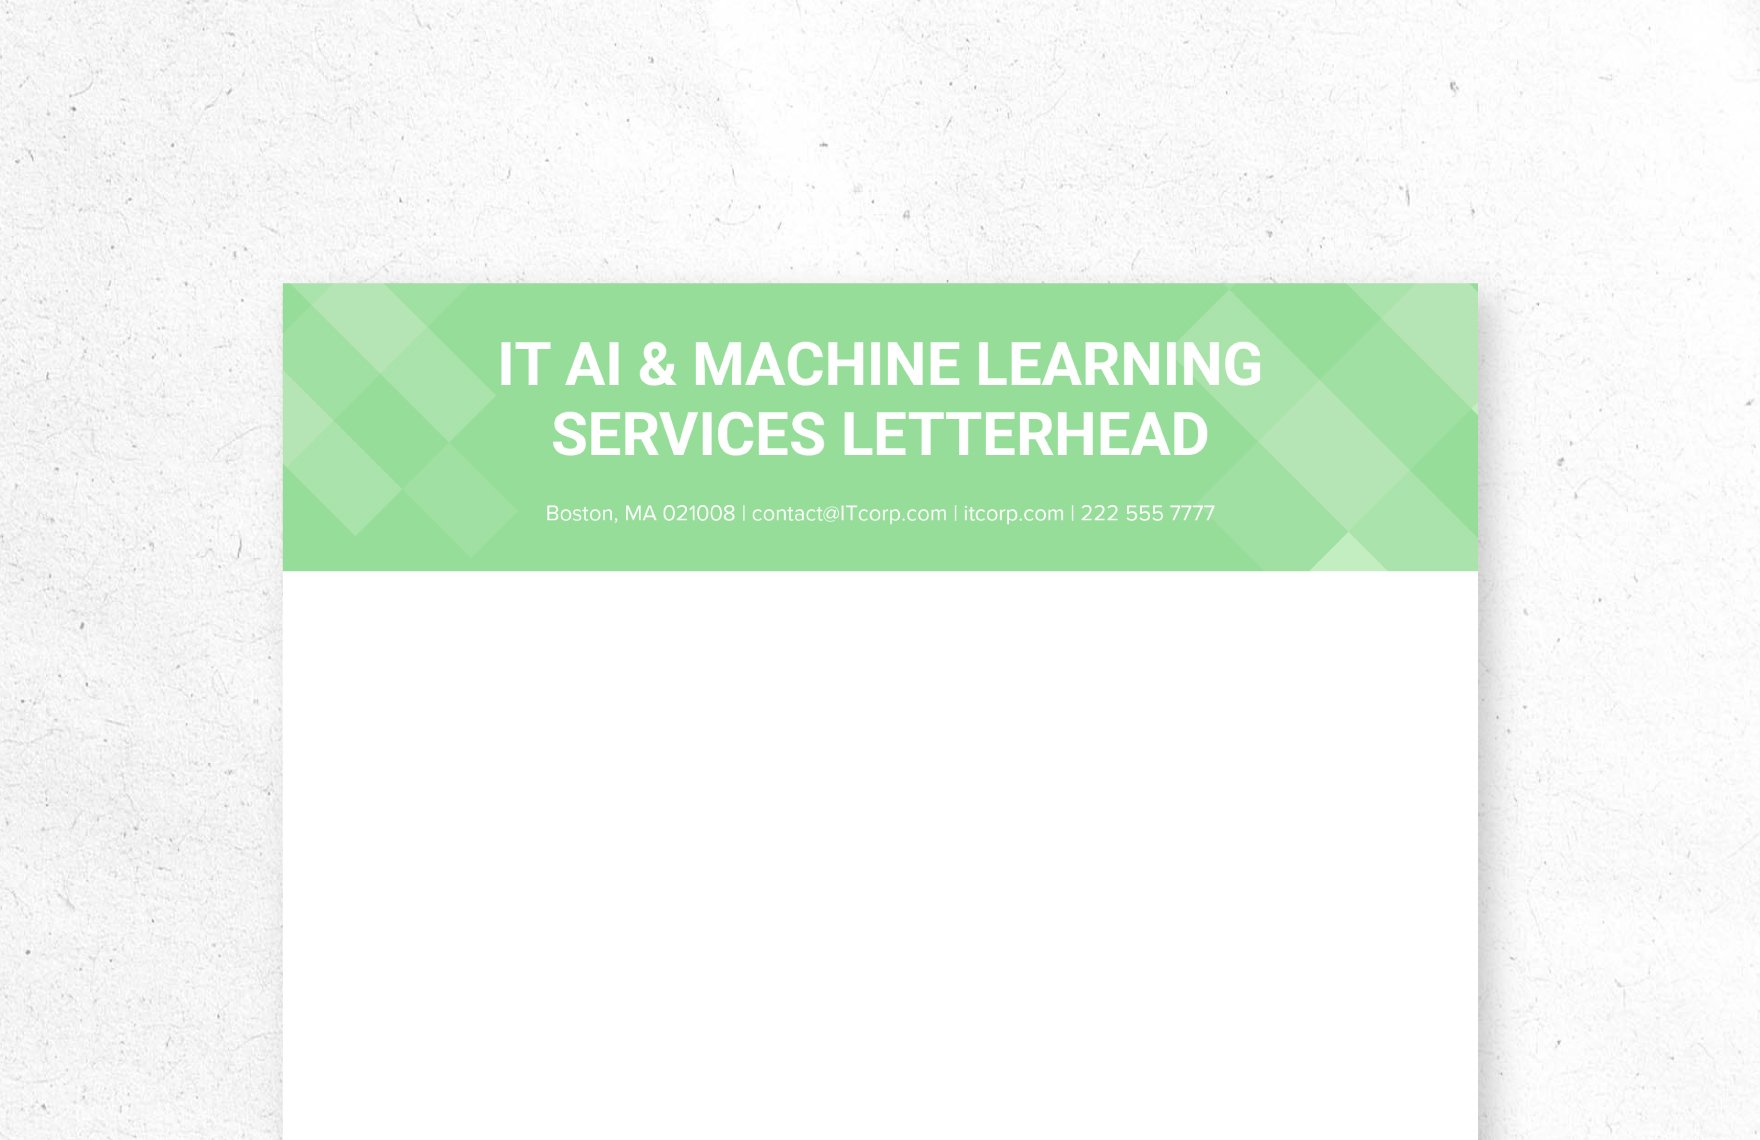 IT AI & Machine Learning Services Letterhead Template in Word, Illustrator, PSD